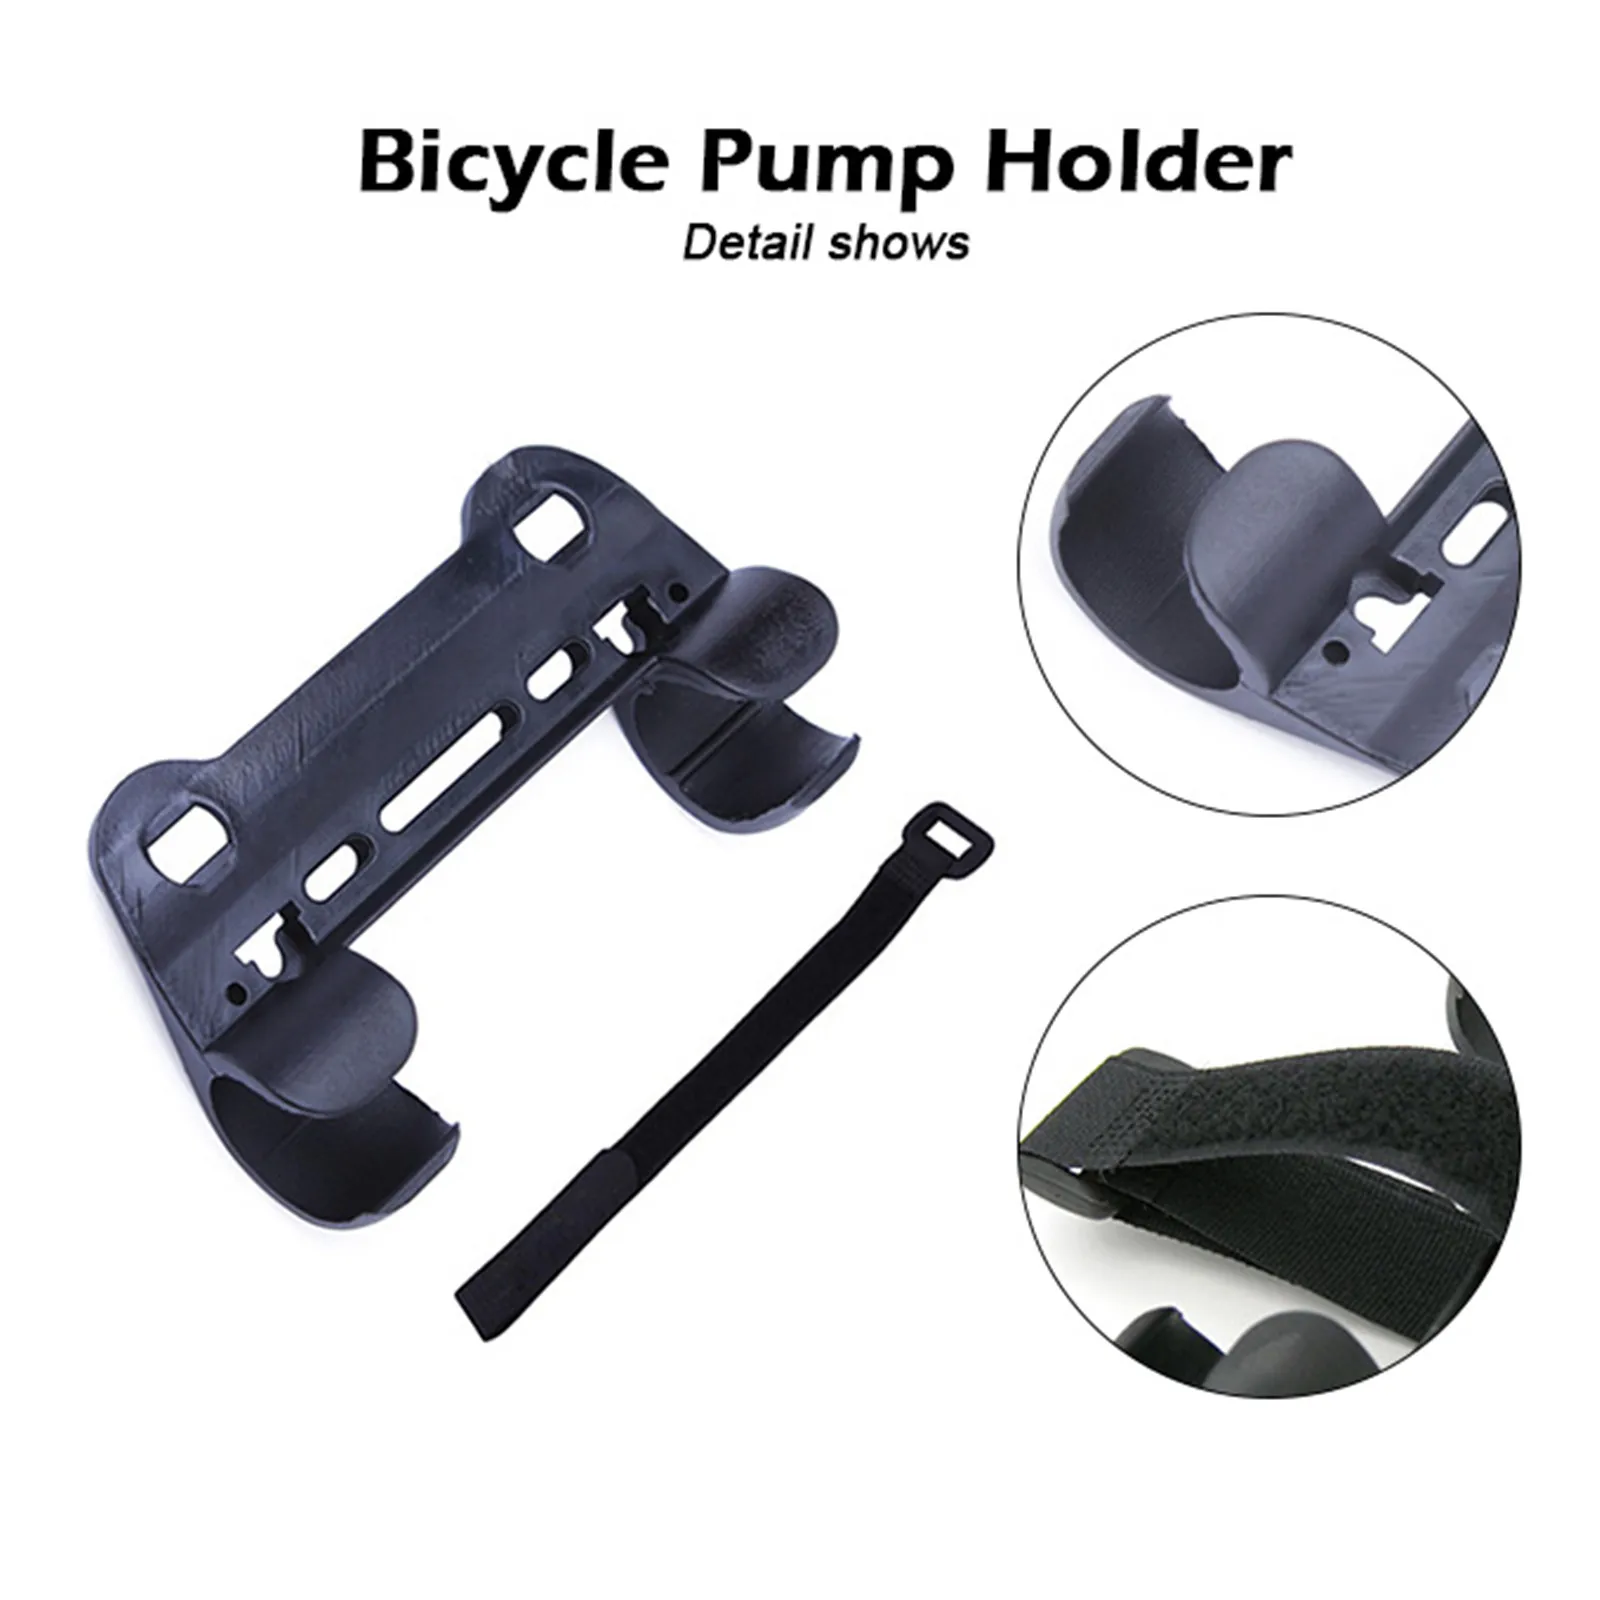 Bicycle Pump Holder Lightweight Strong-Bicycle Frame Mounted Black Compatible Bracket Clip – Perfect For Road And Mountain Bikes